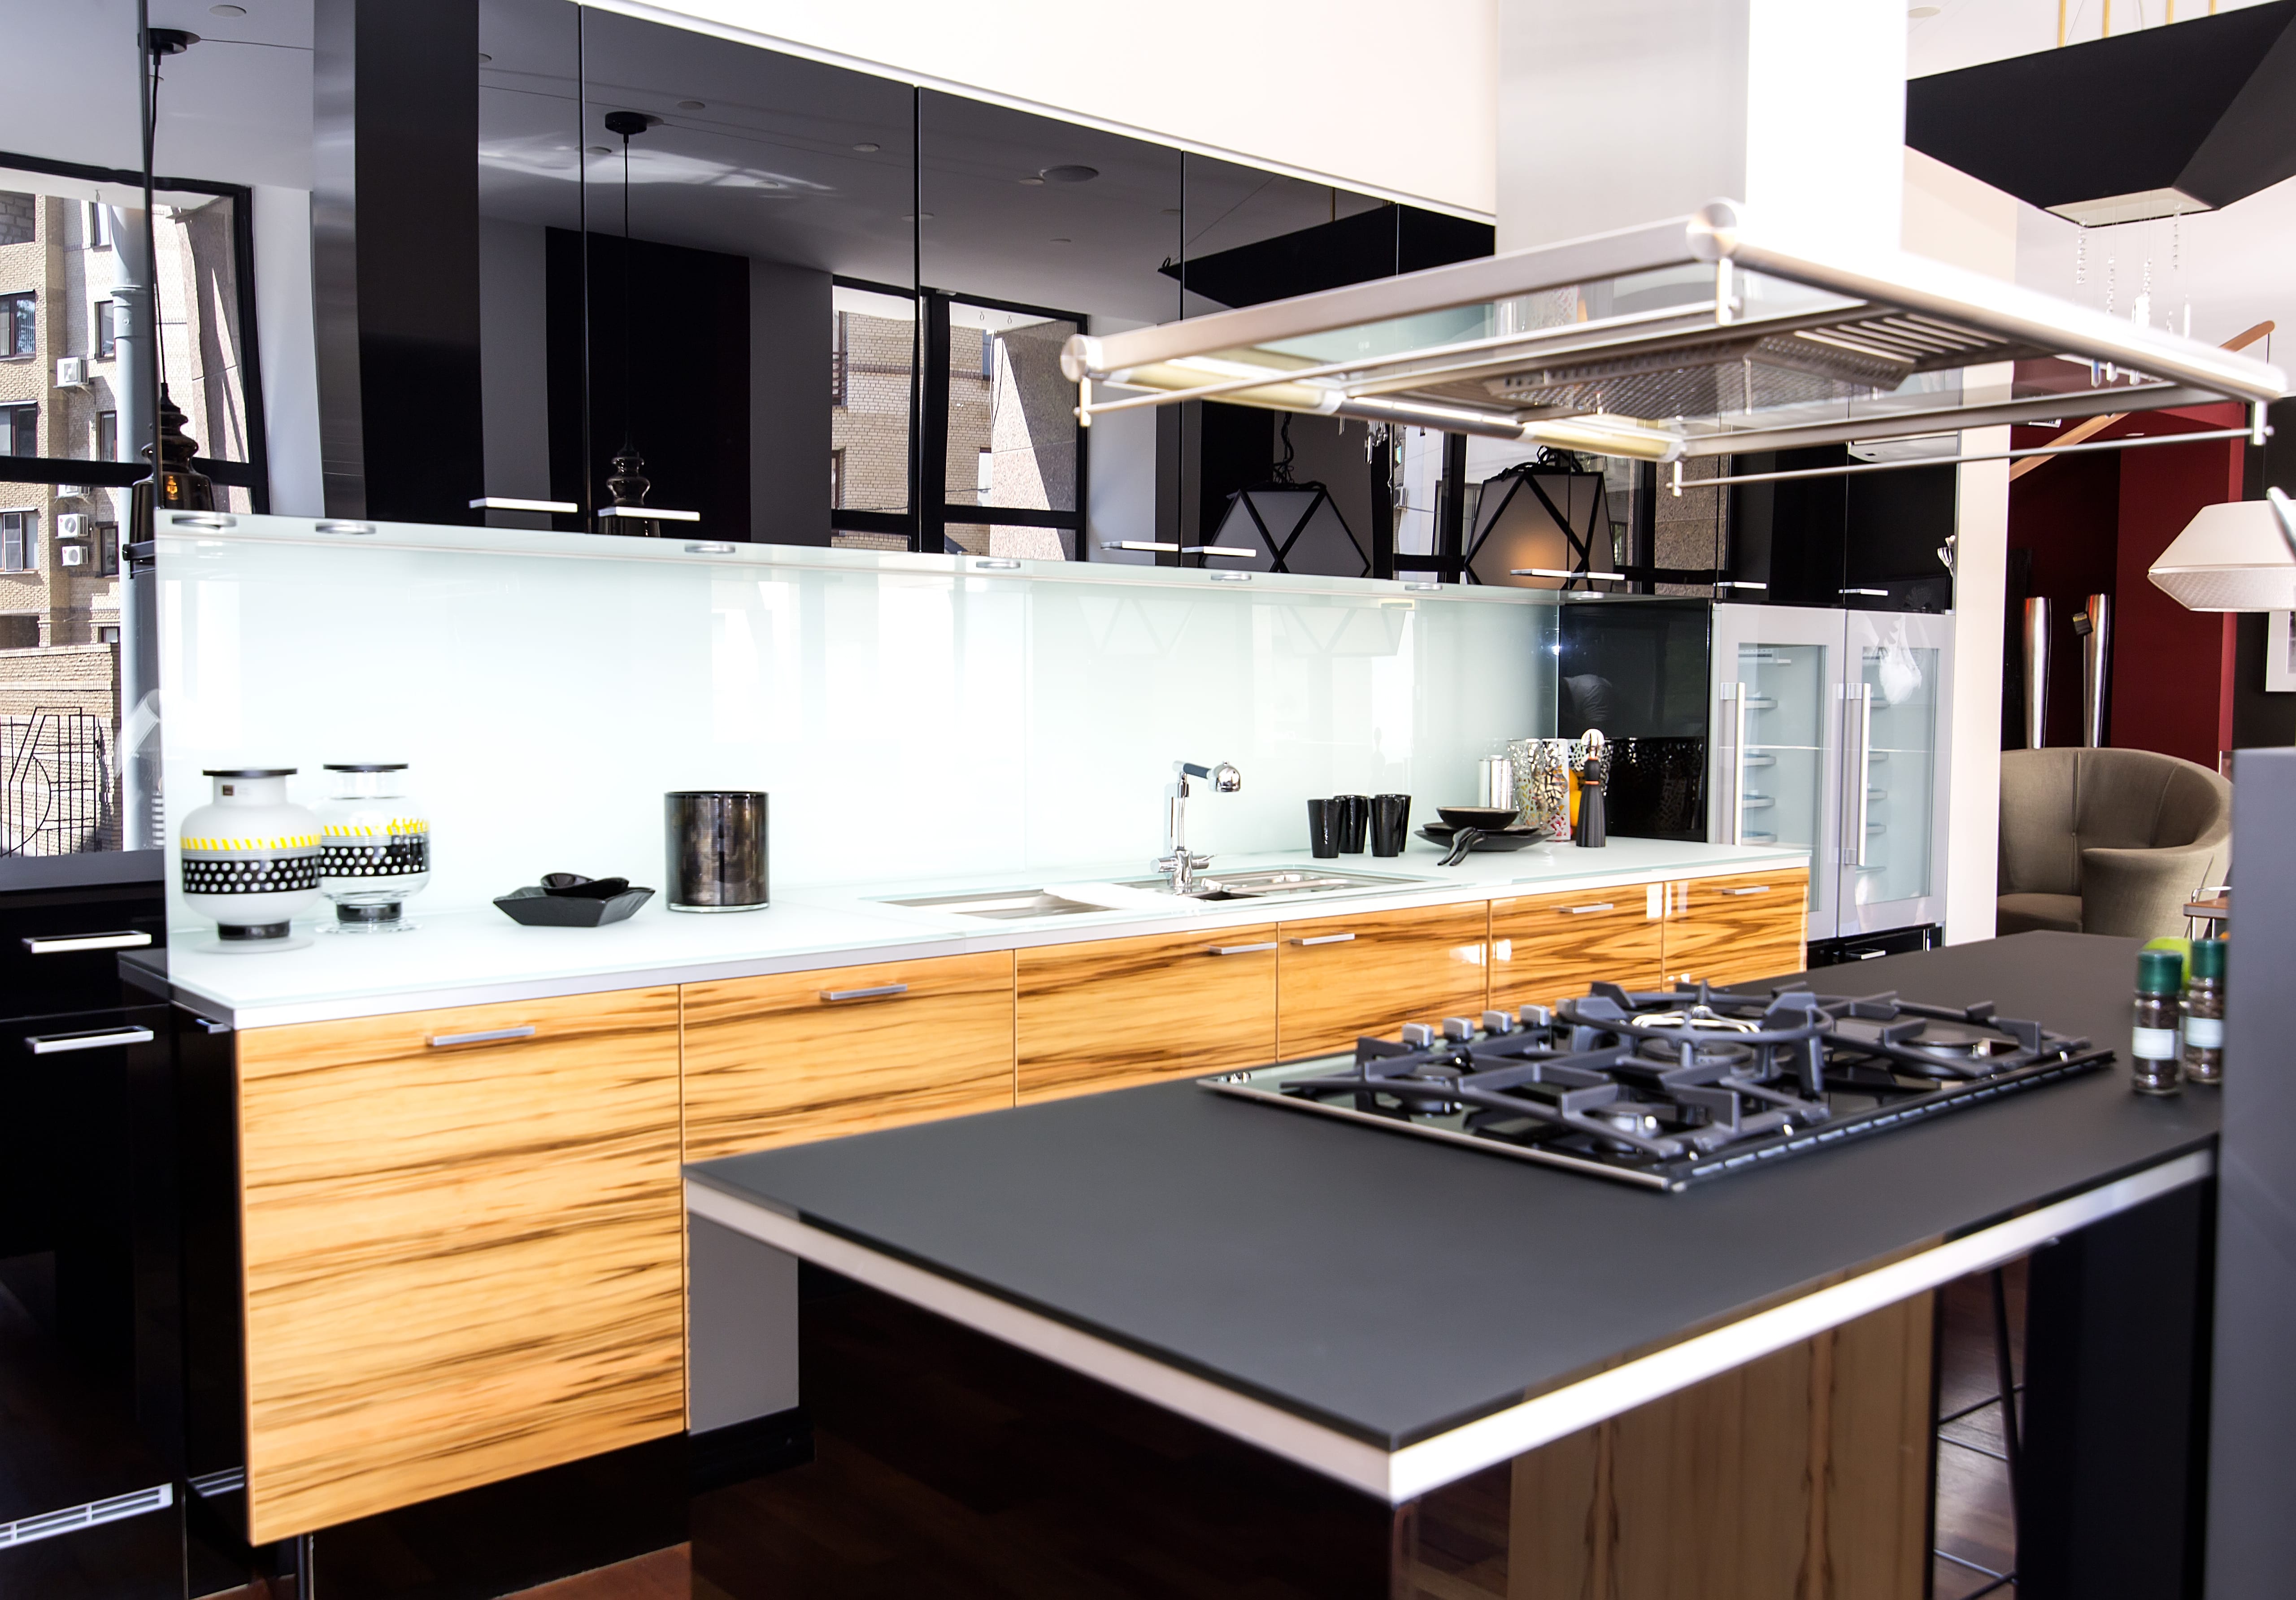 A clean, sleek kitchen with high gloss black cabinets reflecting the natural light outside